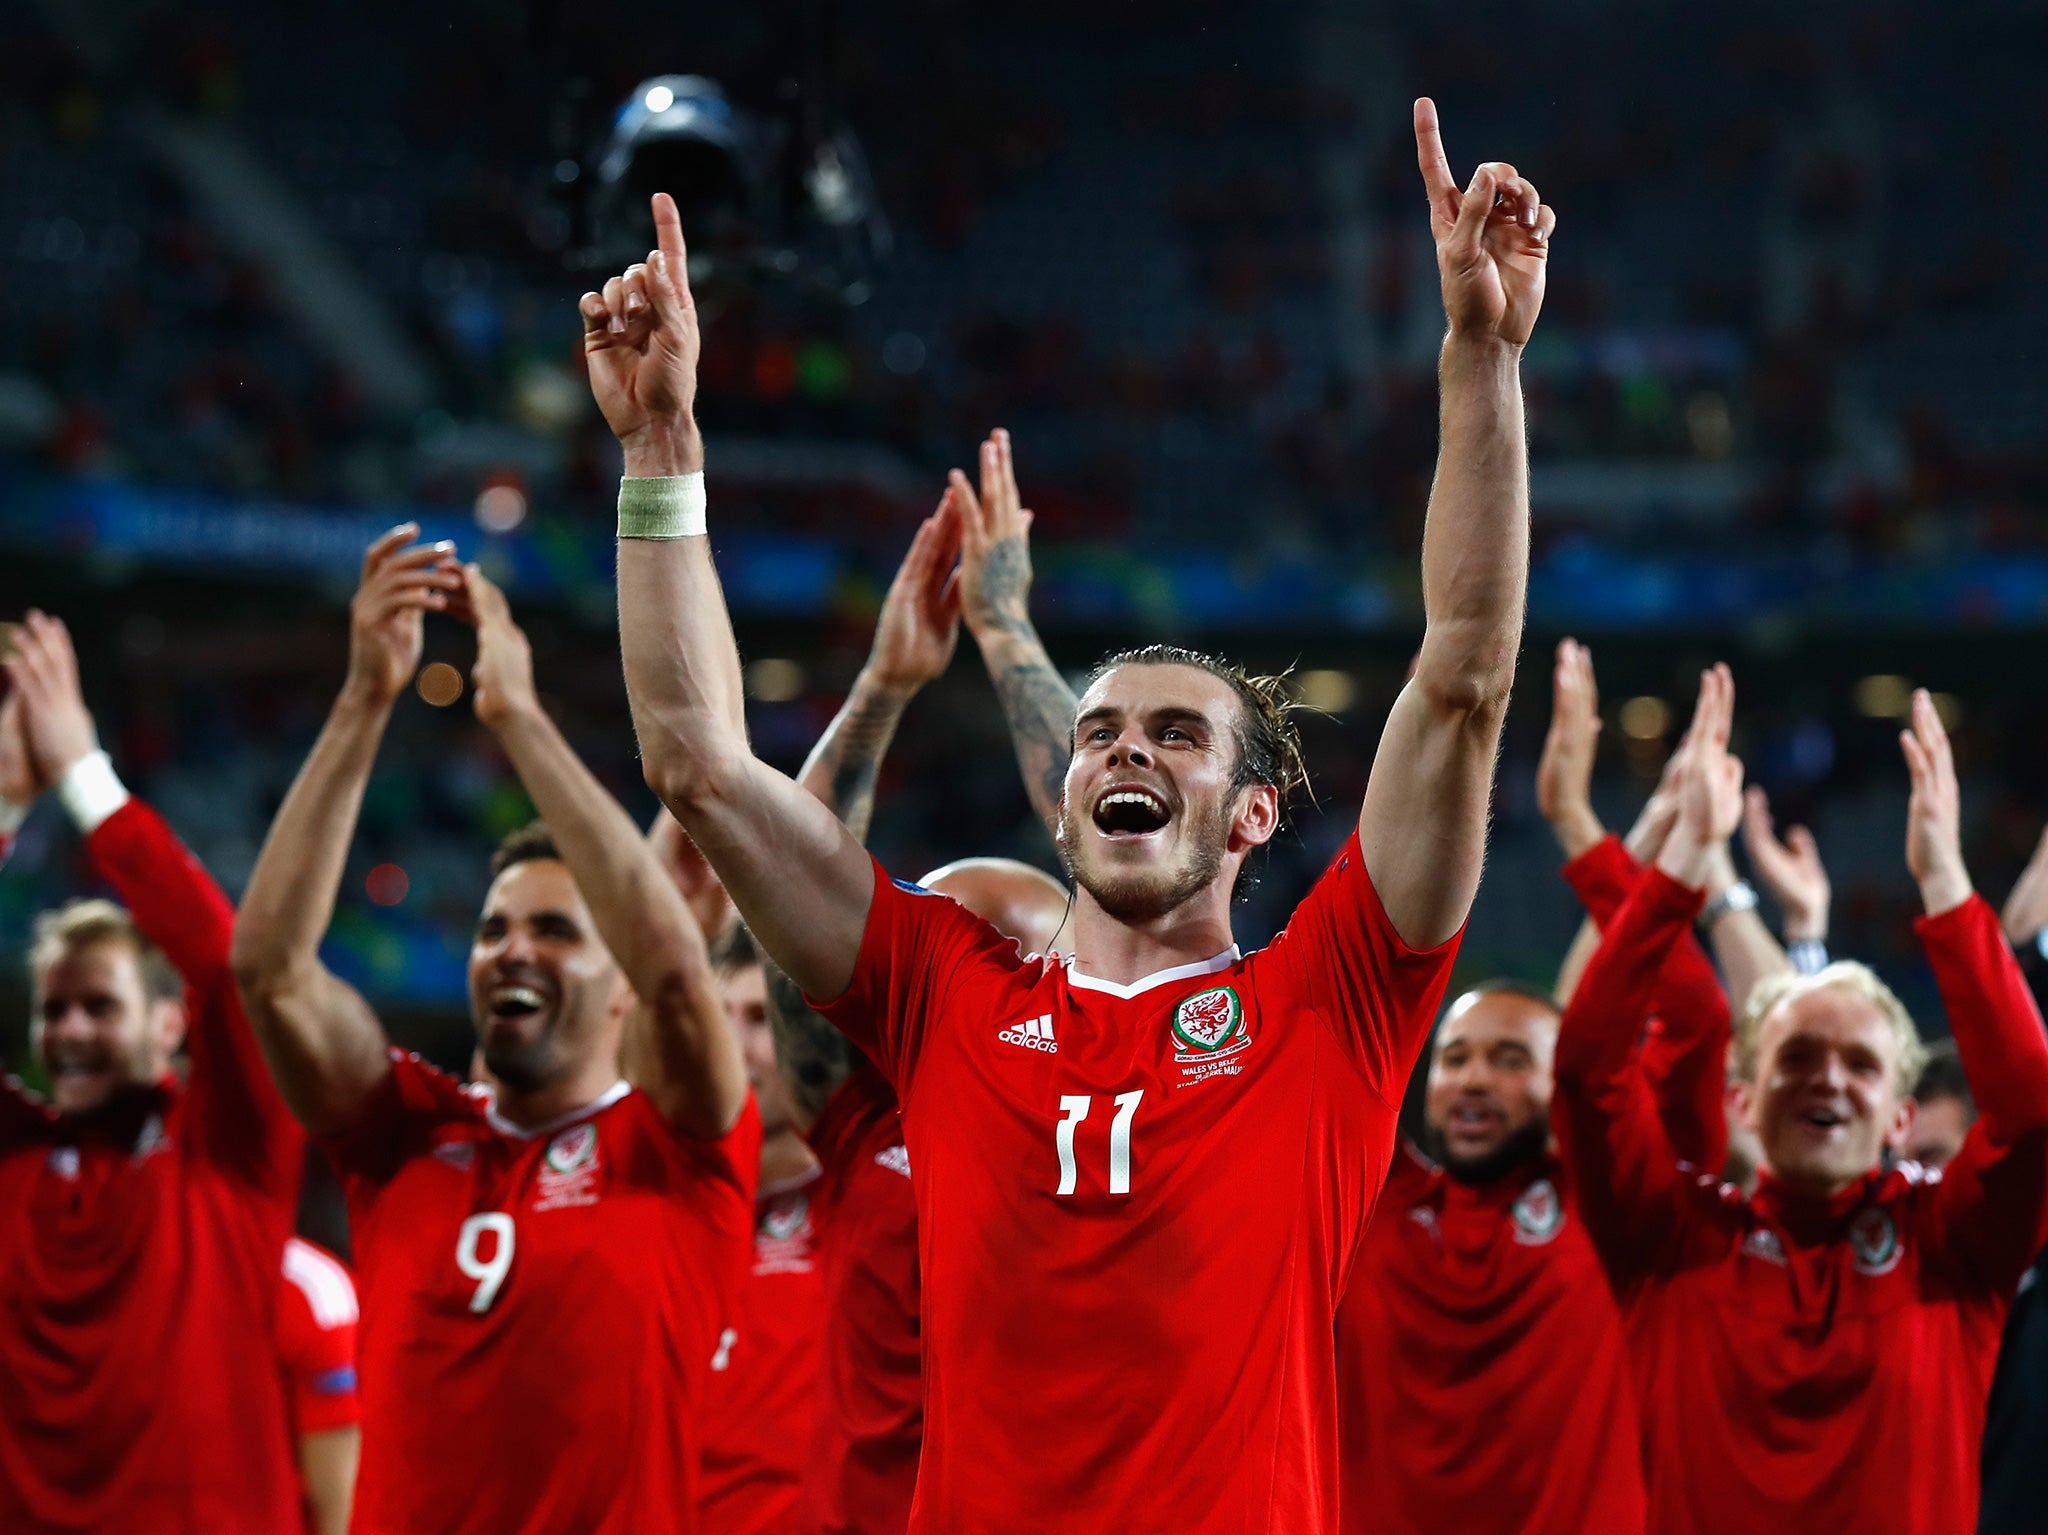 Wales provided one of Euro 2016's most compelling stories